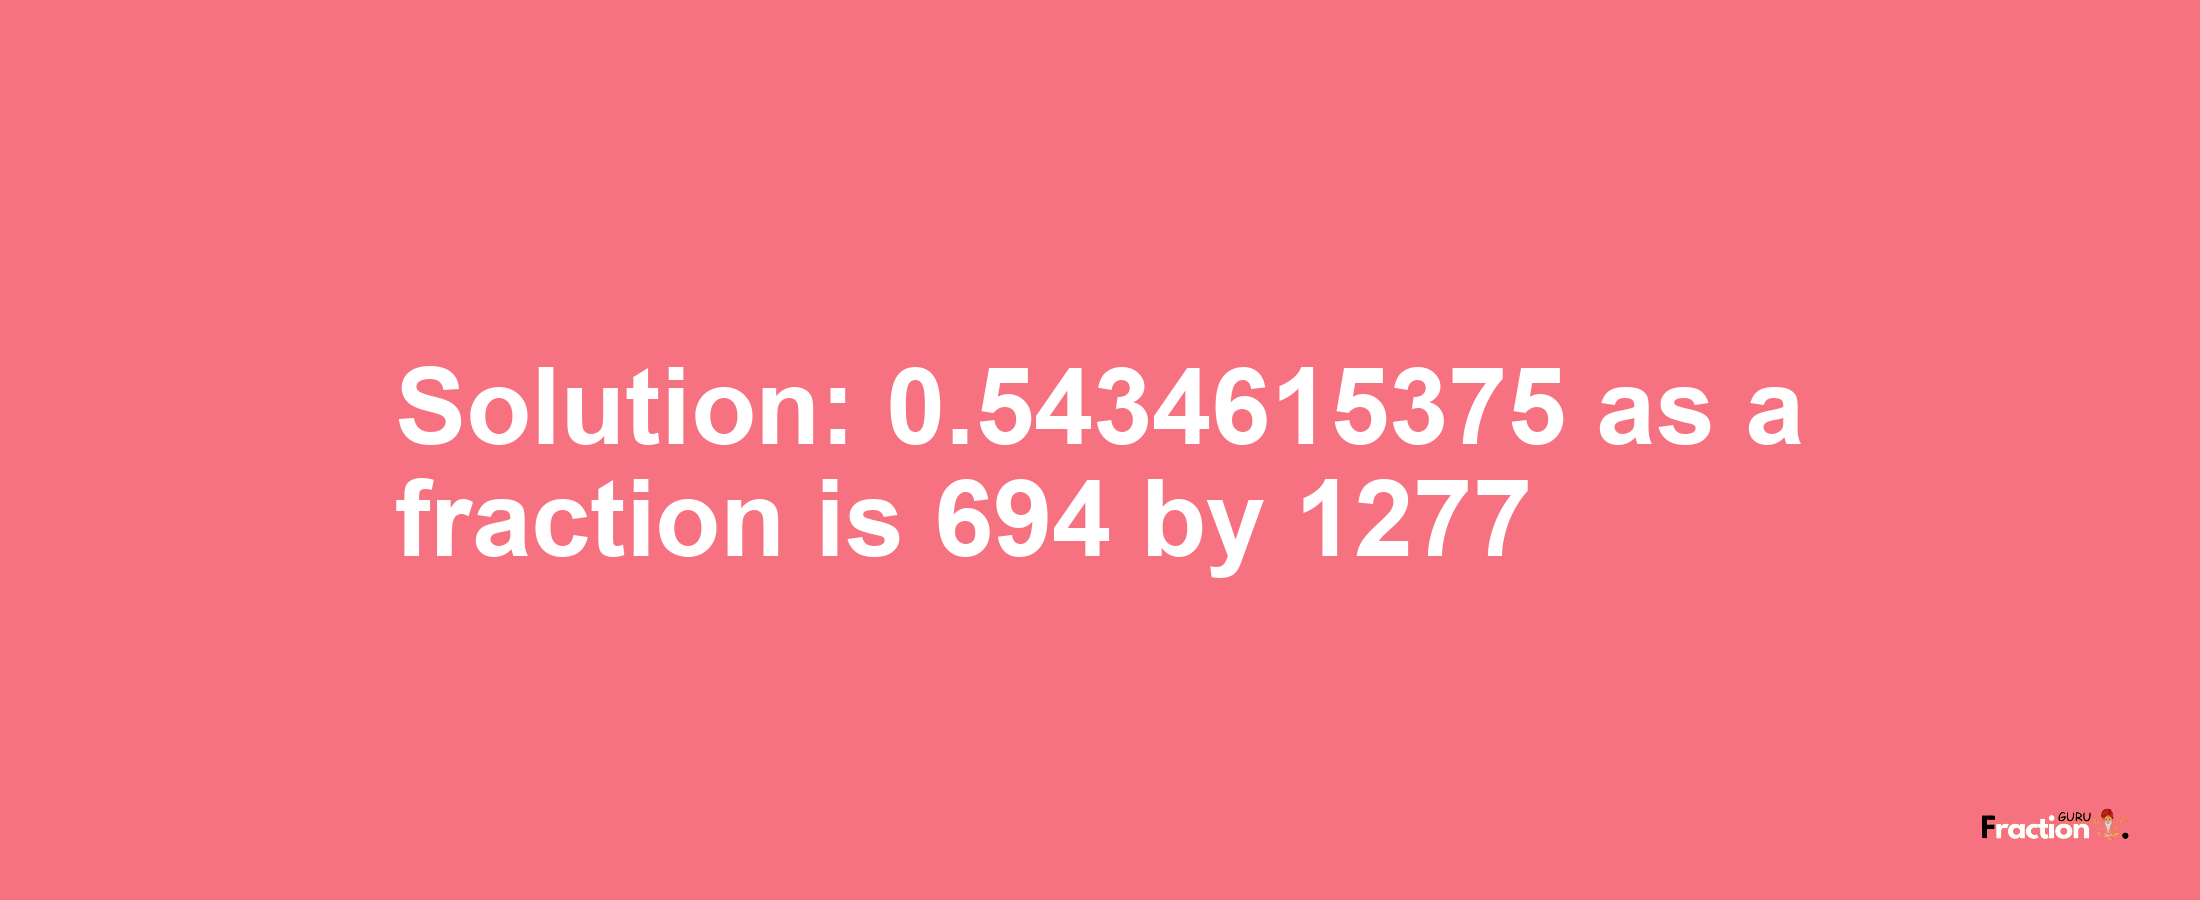 Solution:0.5434615375 as a fraction is 694/1277